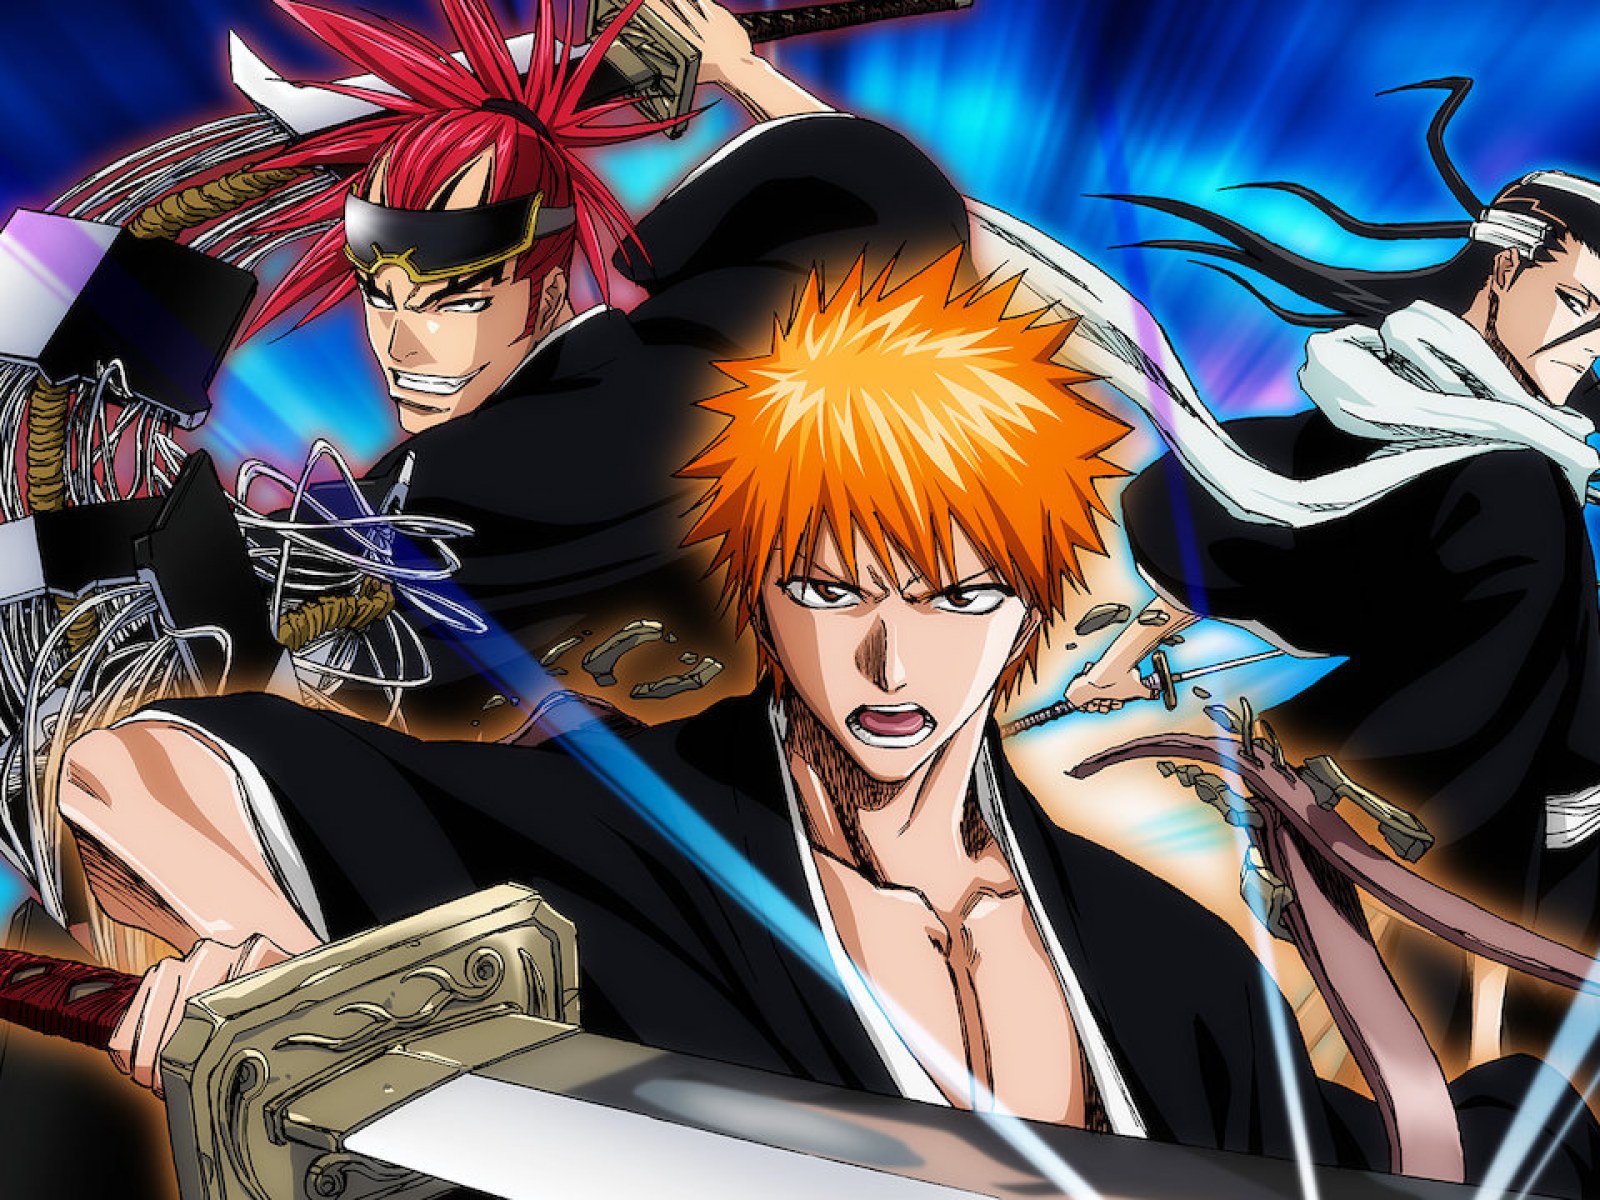 Bleach' Creator Tite Kubo Teases New Manga Arc in 20th Anniversary Special